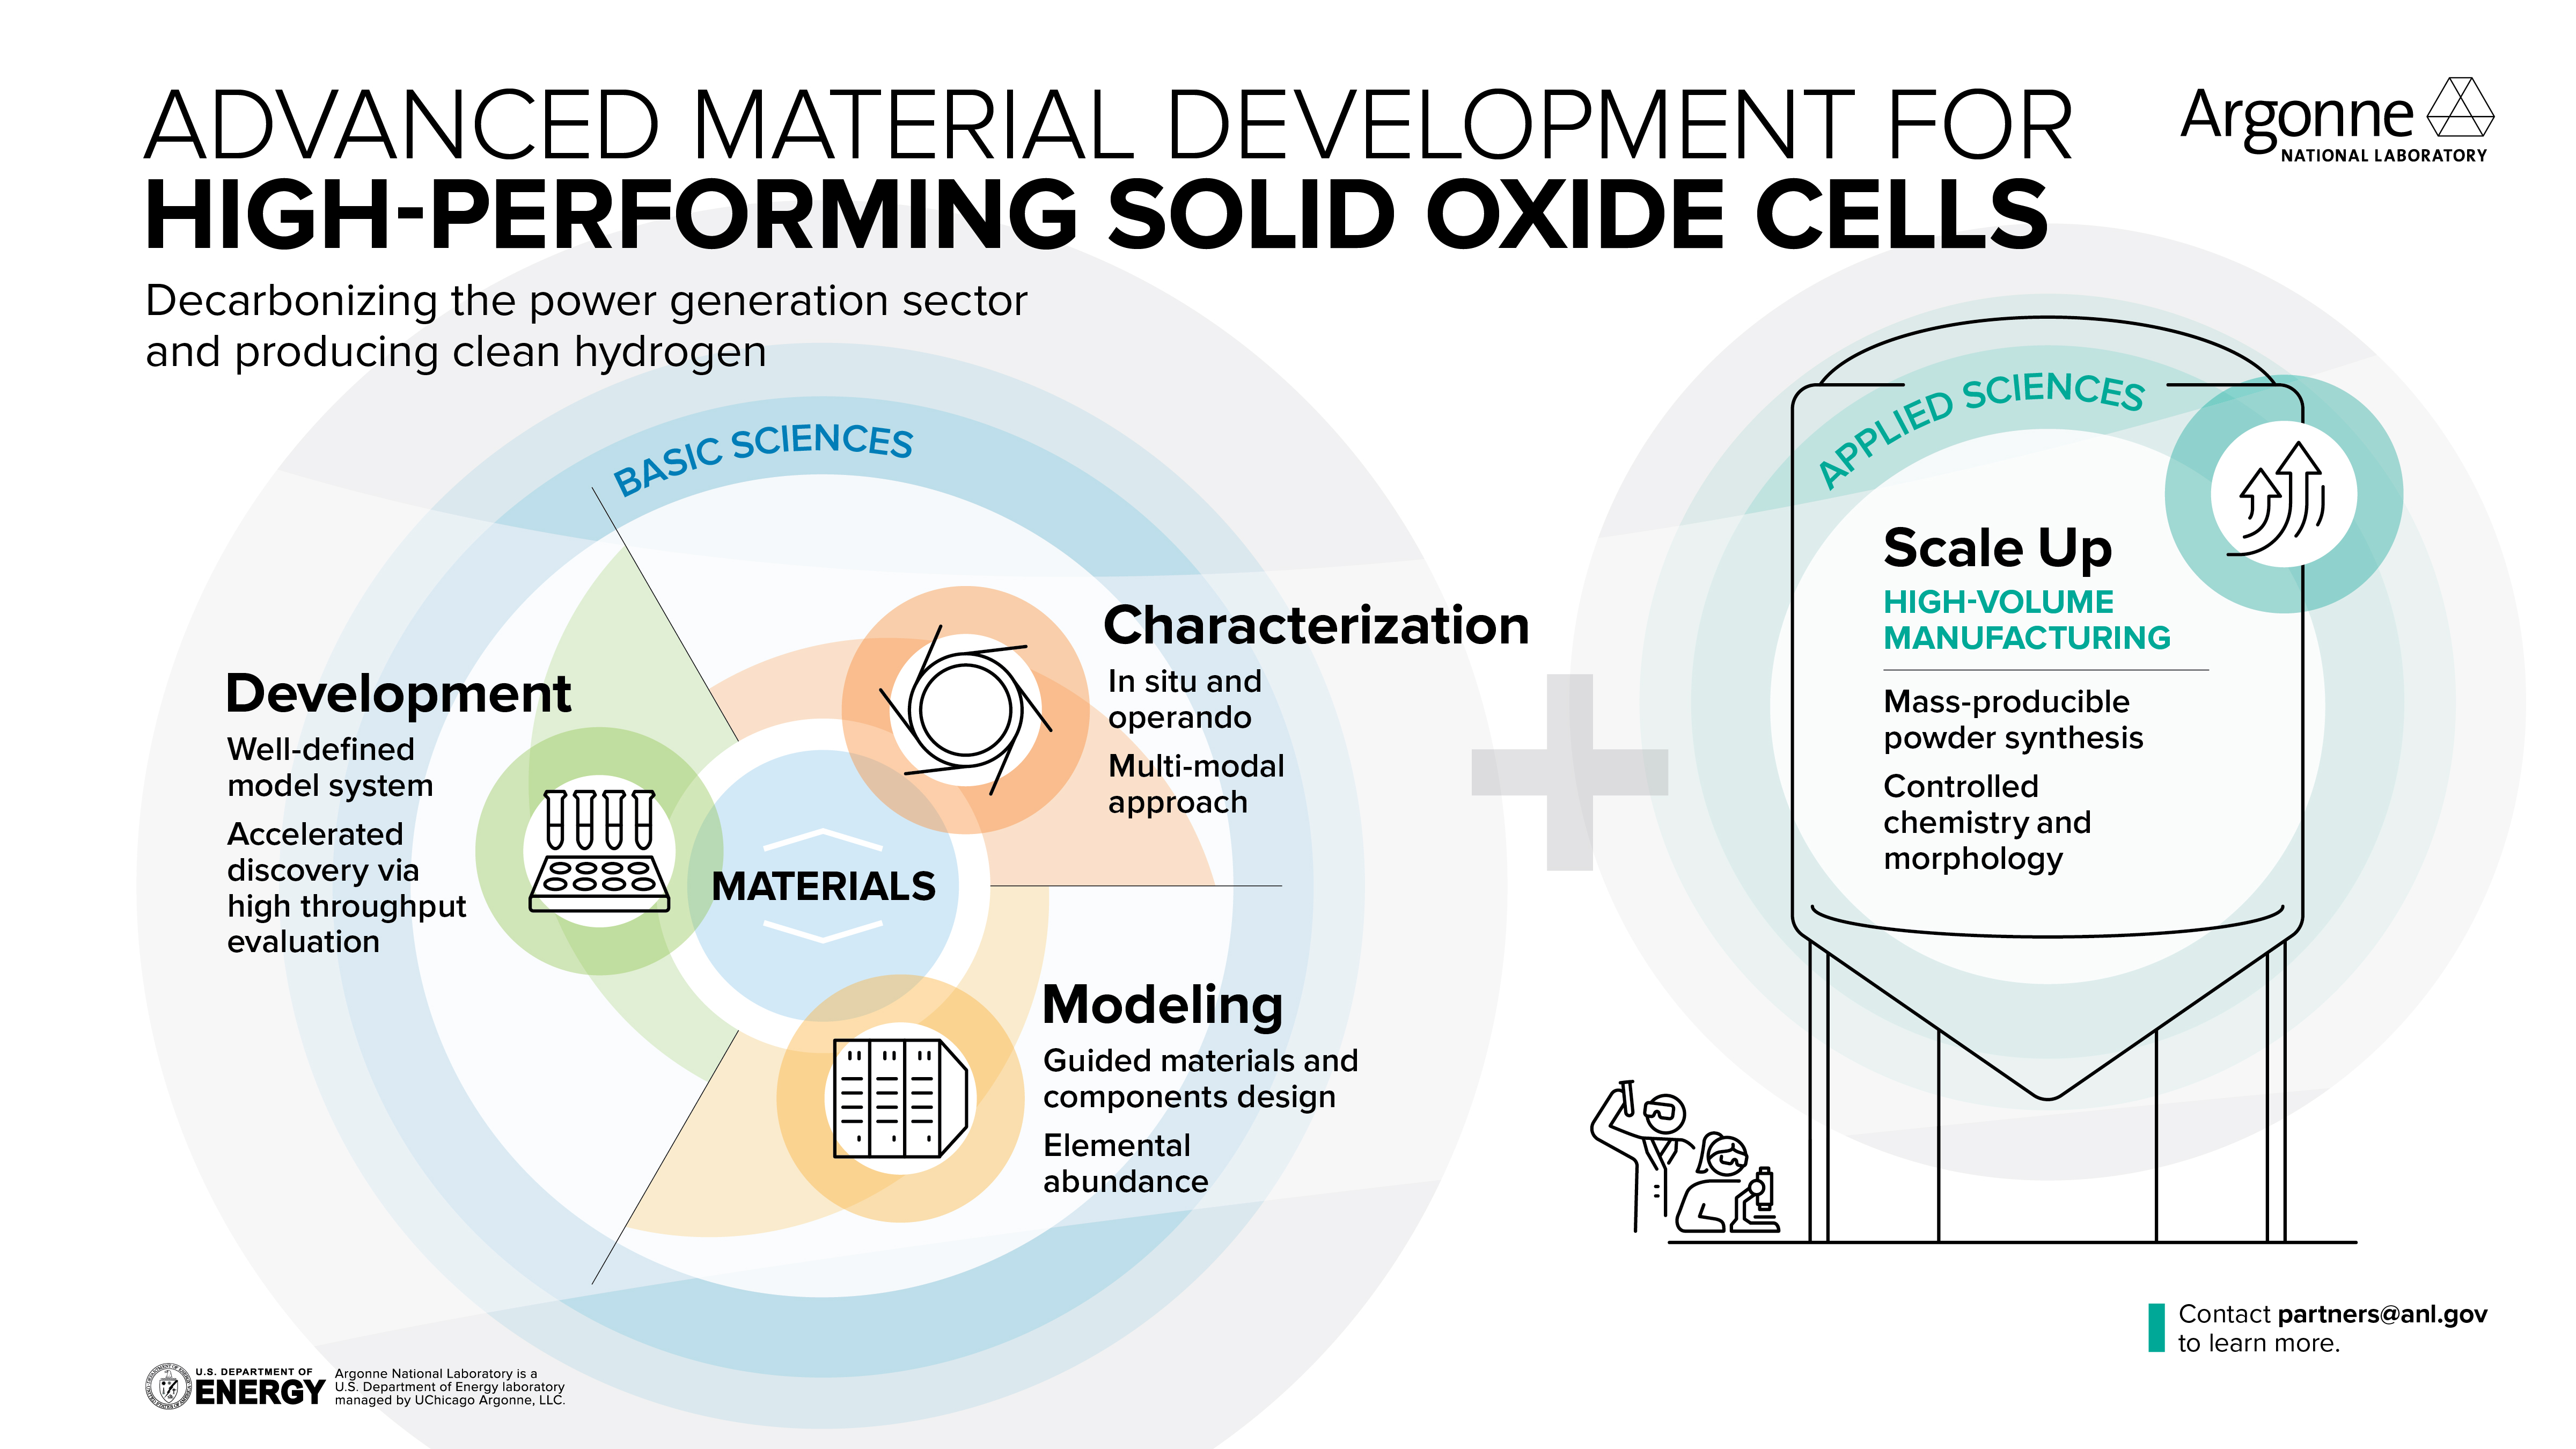 Advanced Material Development for High-performing Solid Oxide Cells